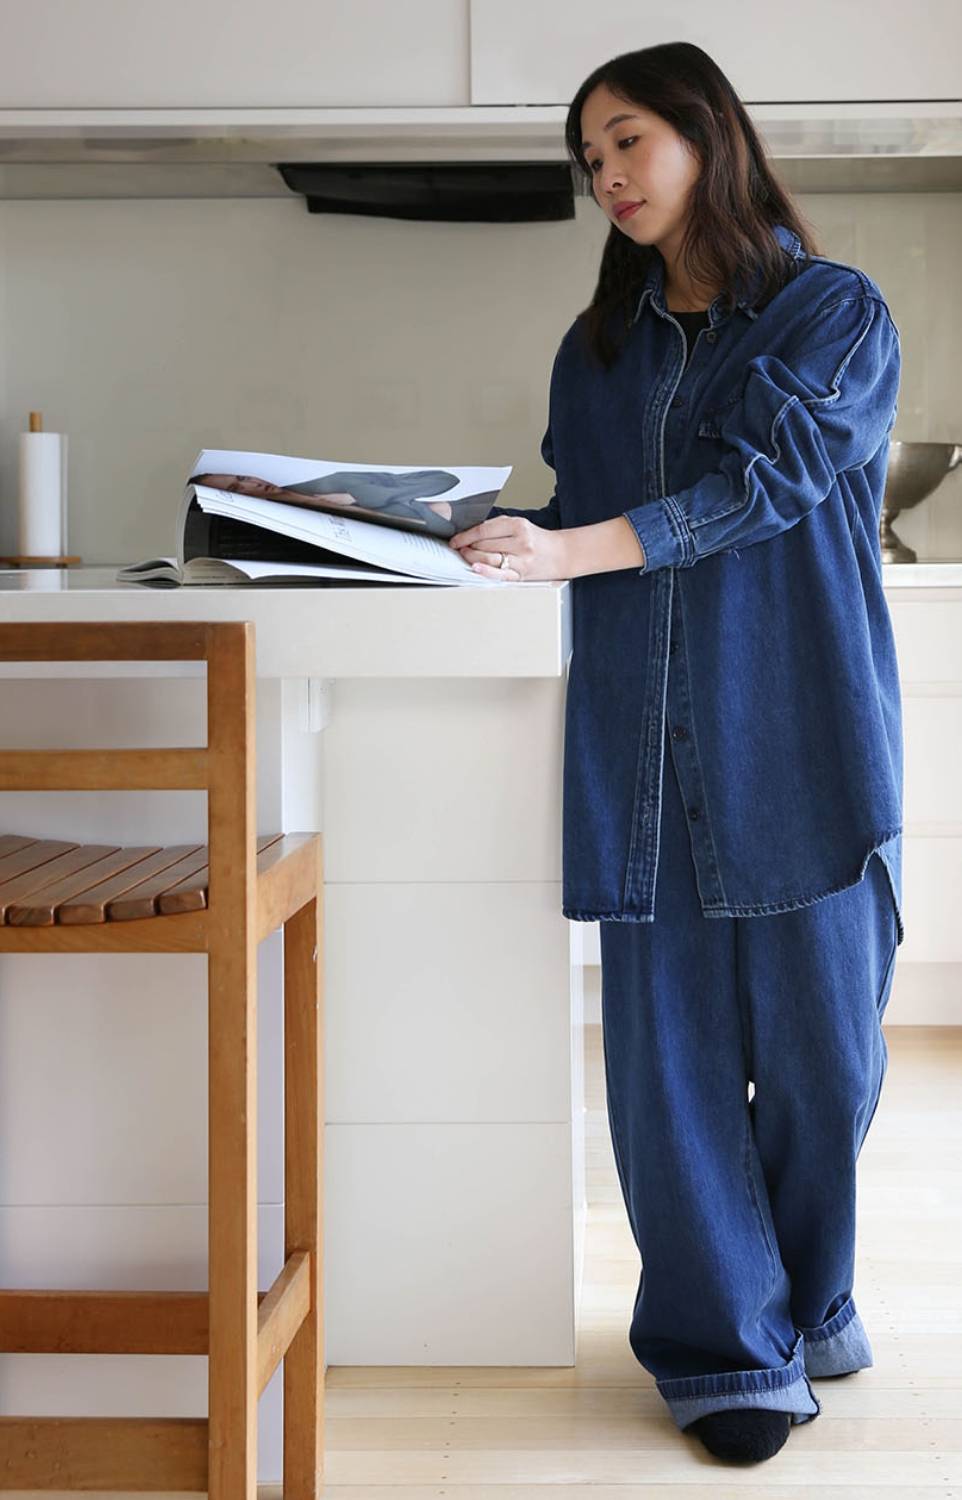 sarah chueh, at her home in central auckland